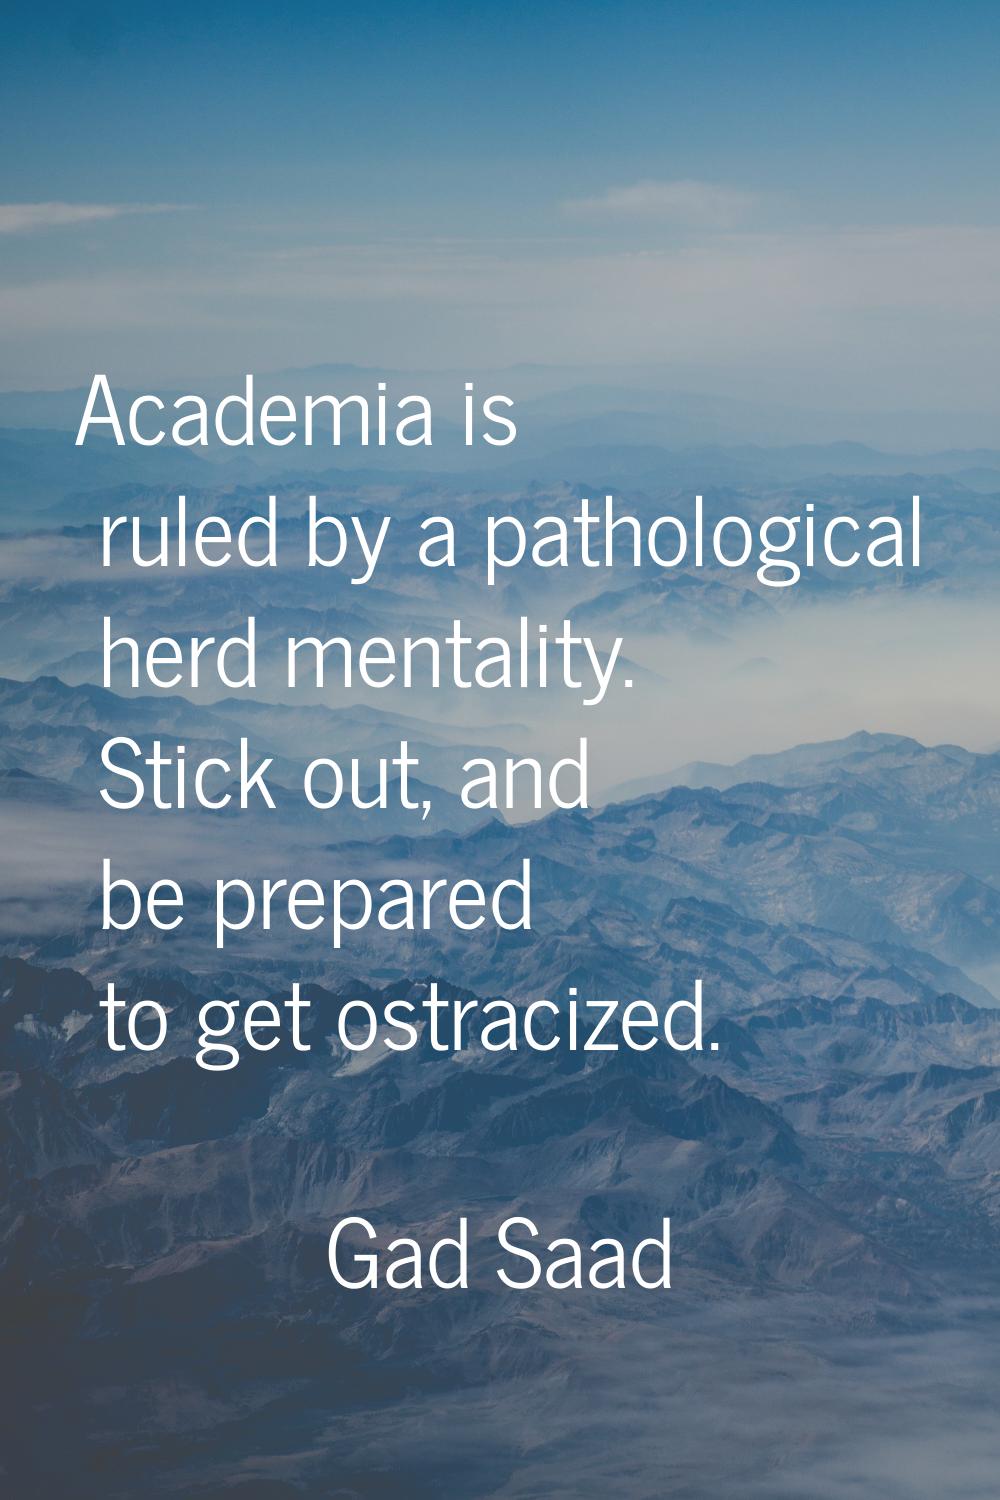 Academia is ruled by a pathological herd mentality. Stick out, and be prepared to get ostracized.